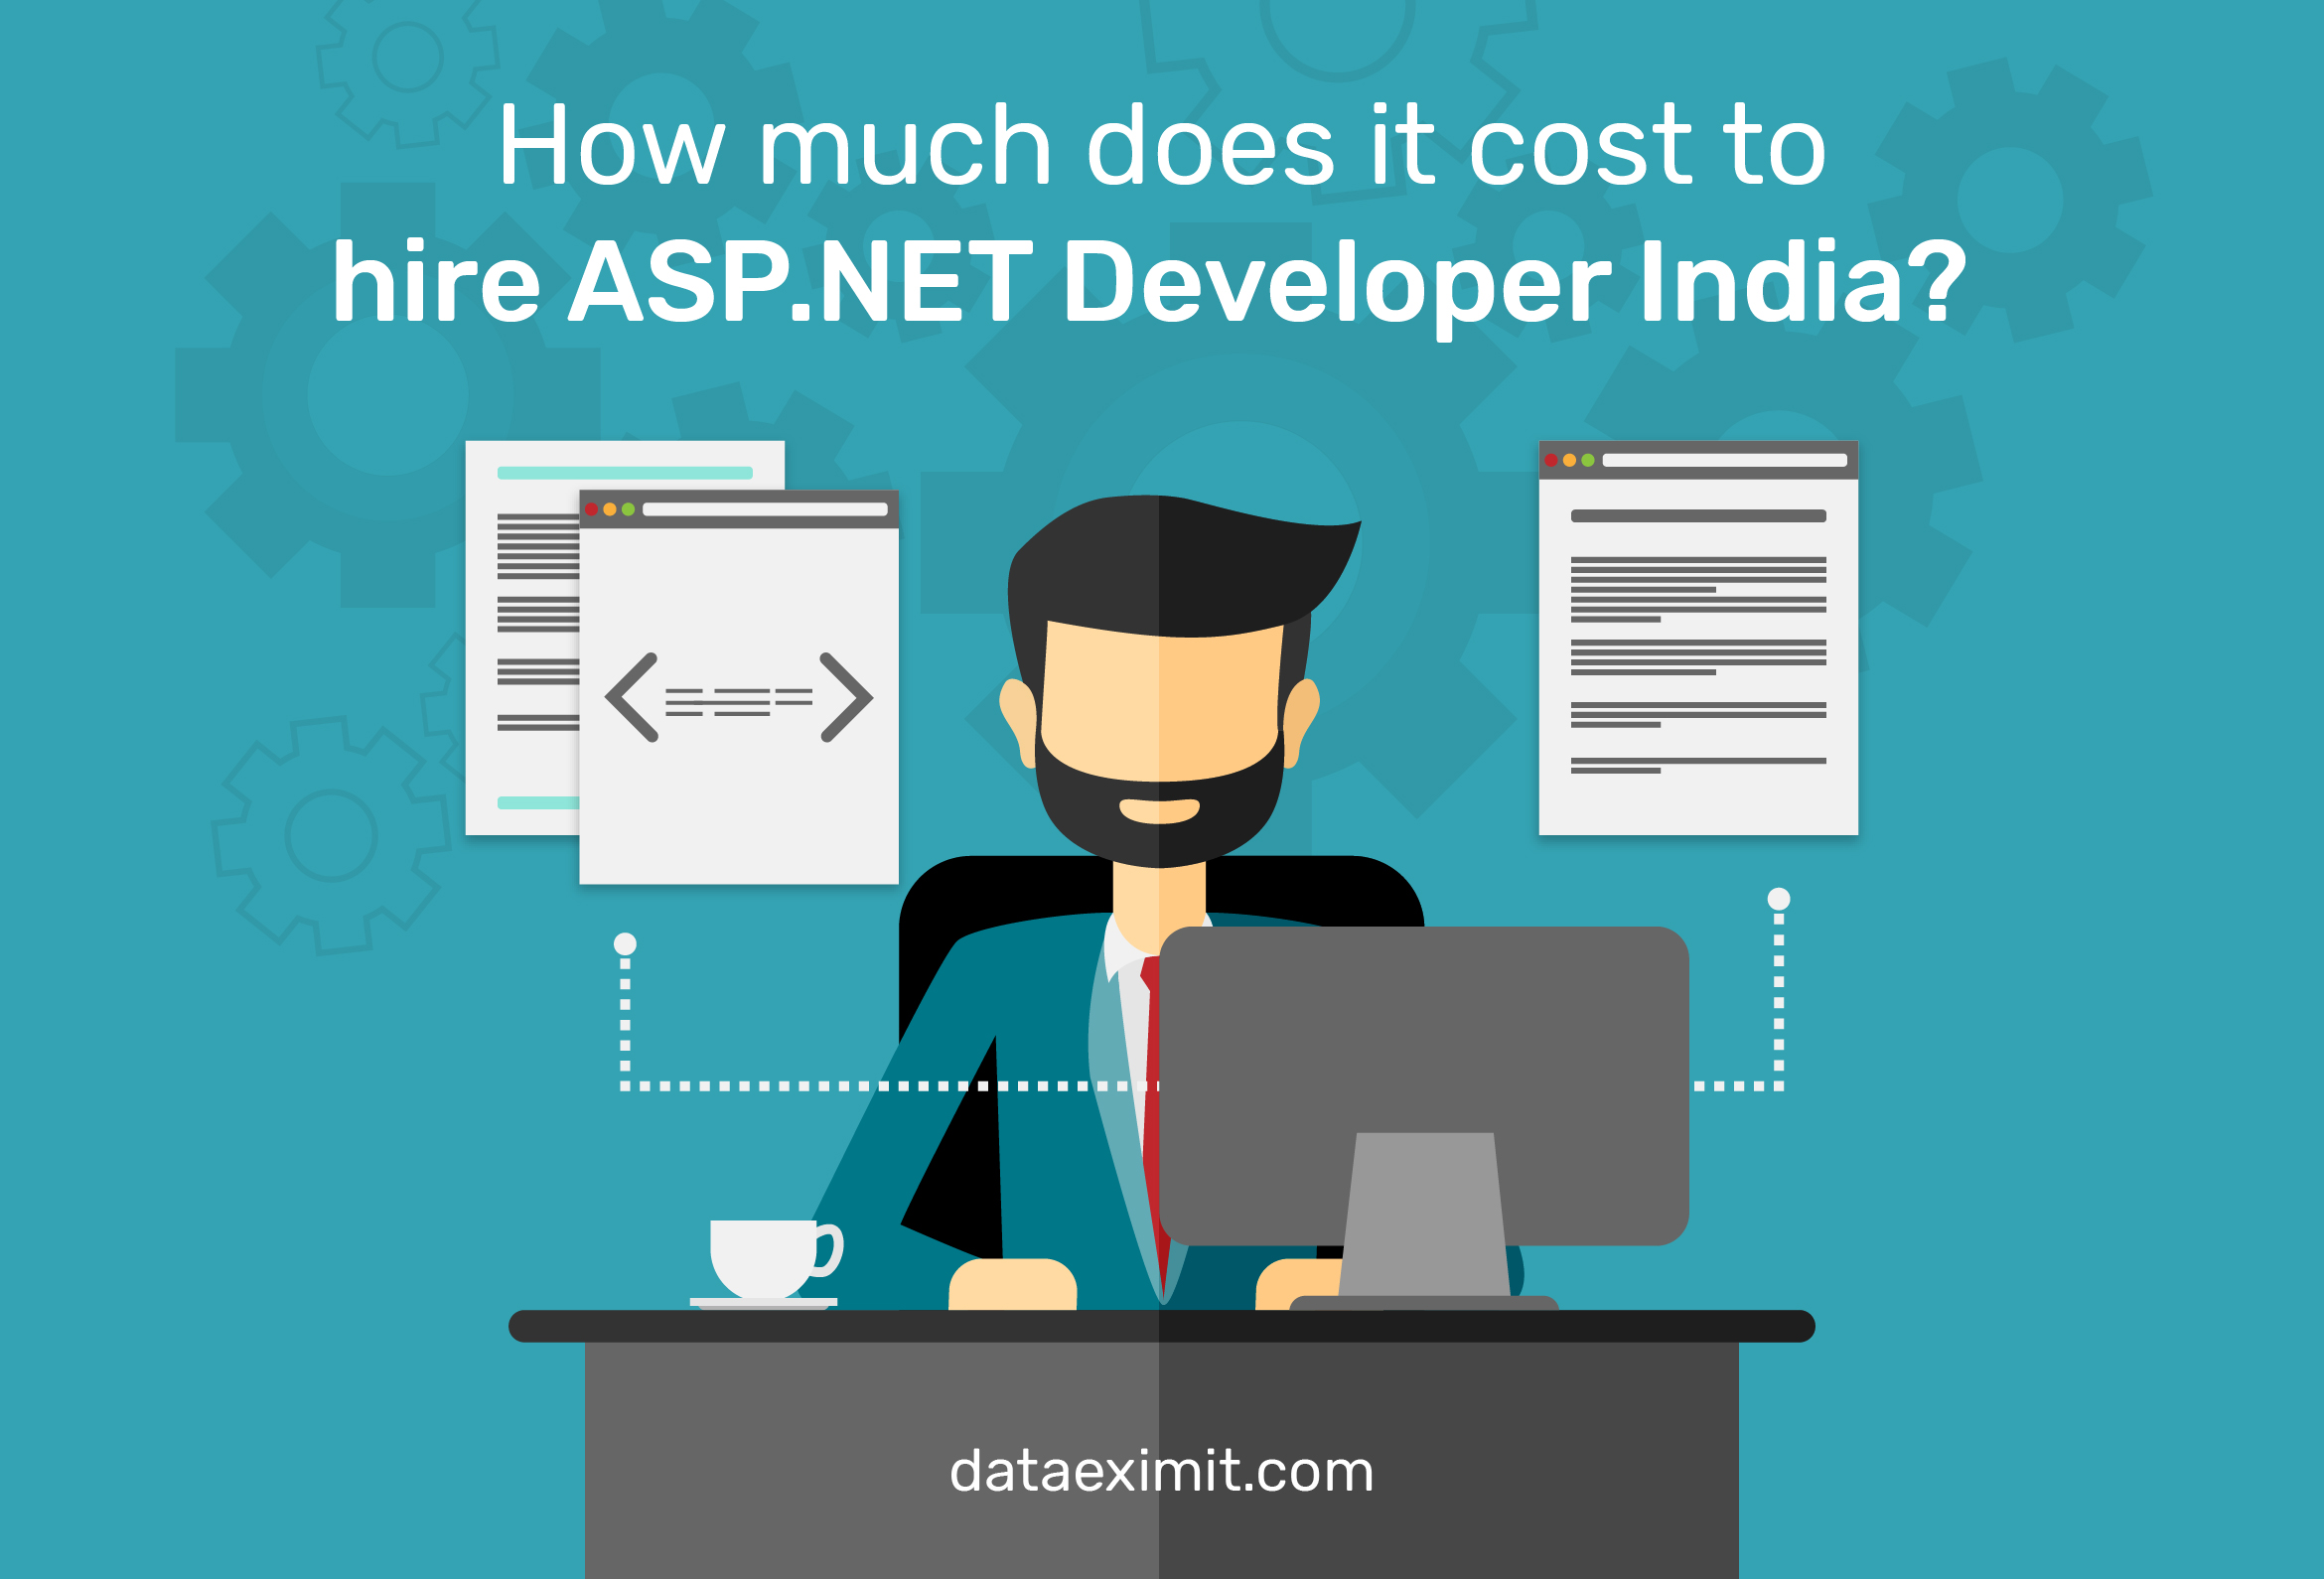 How much does it cost to hire ASP.NET Developer India?